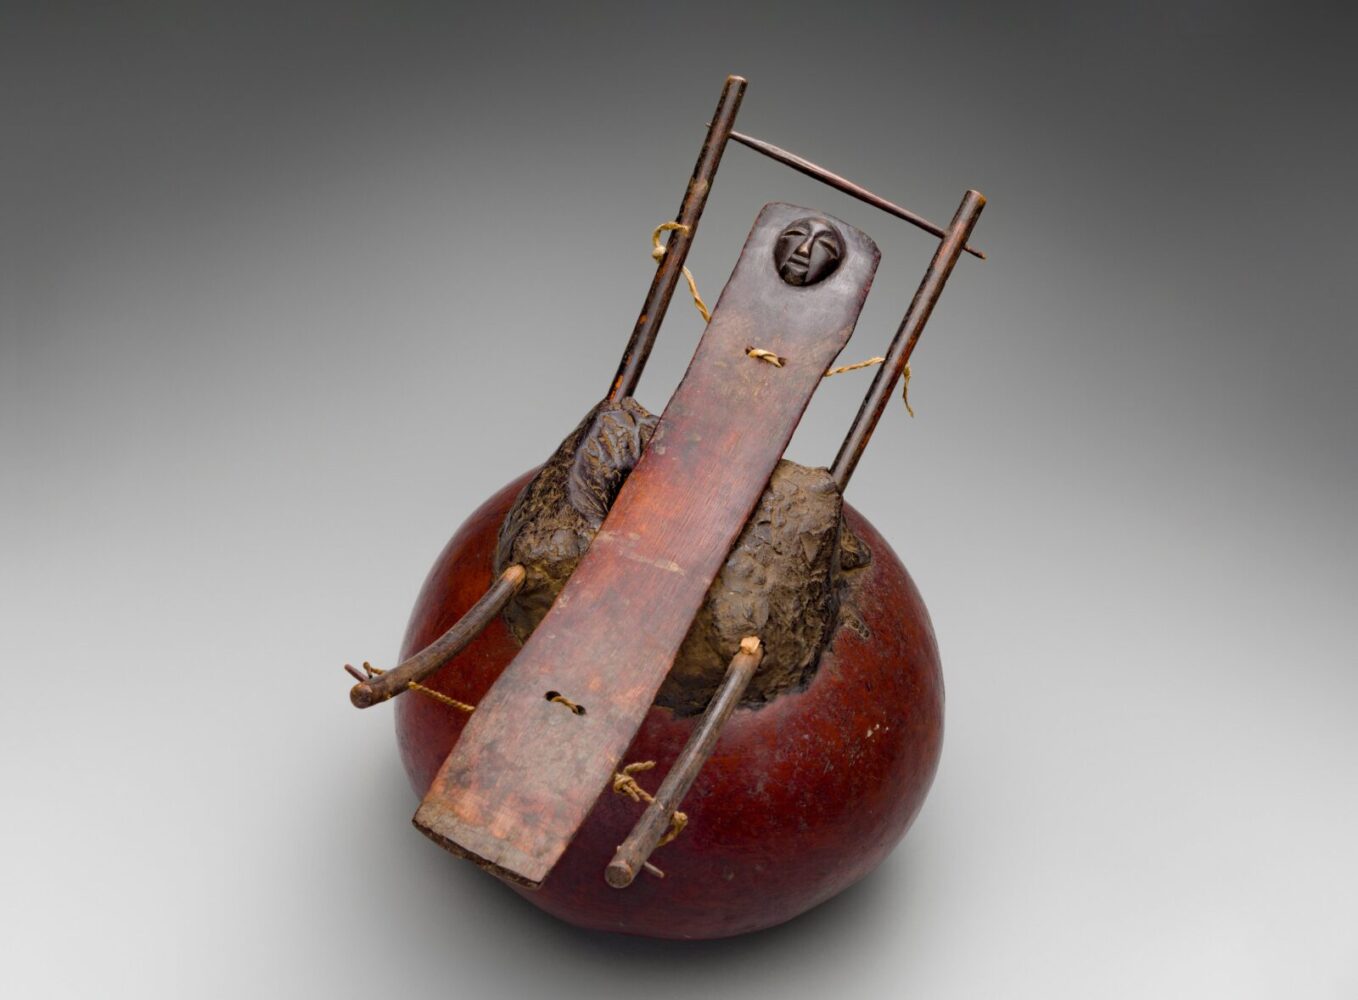 SFO layover? See Art of African Instruments